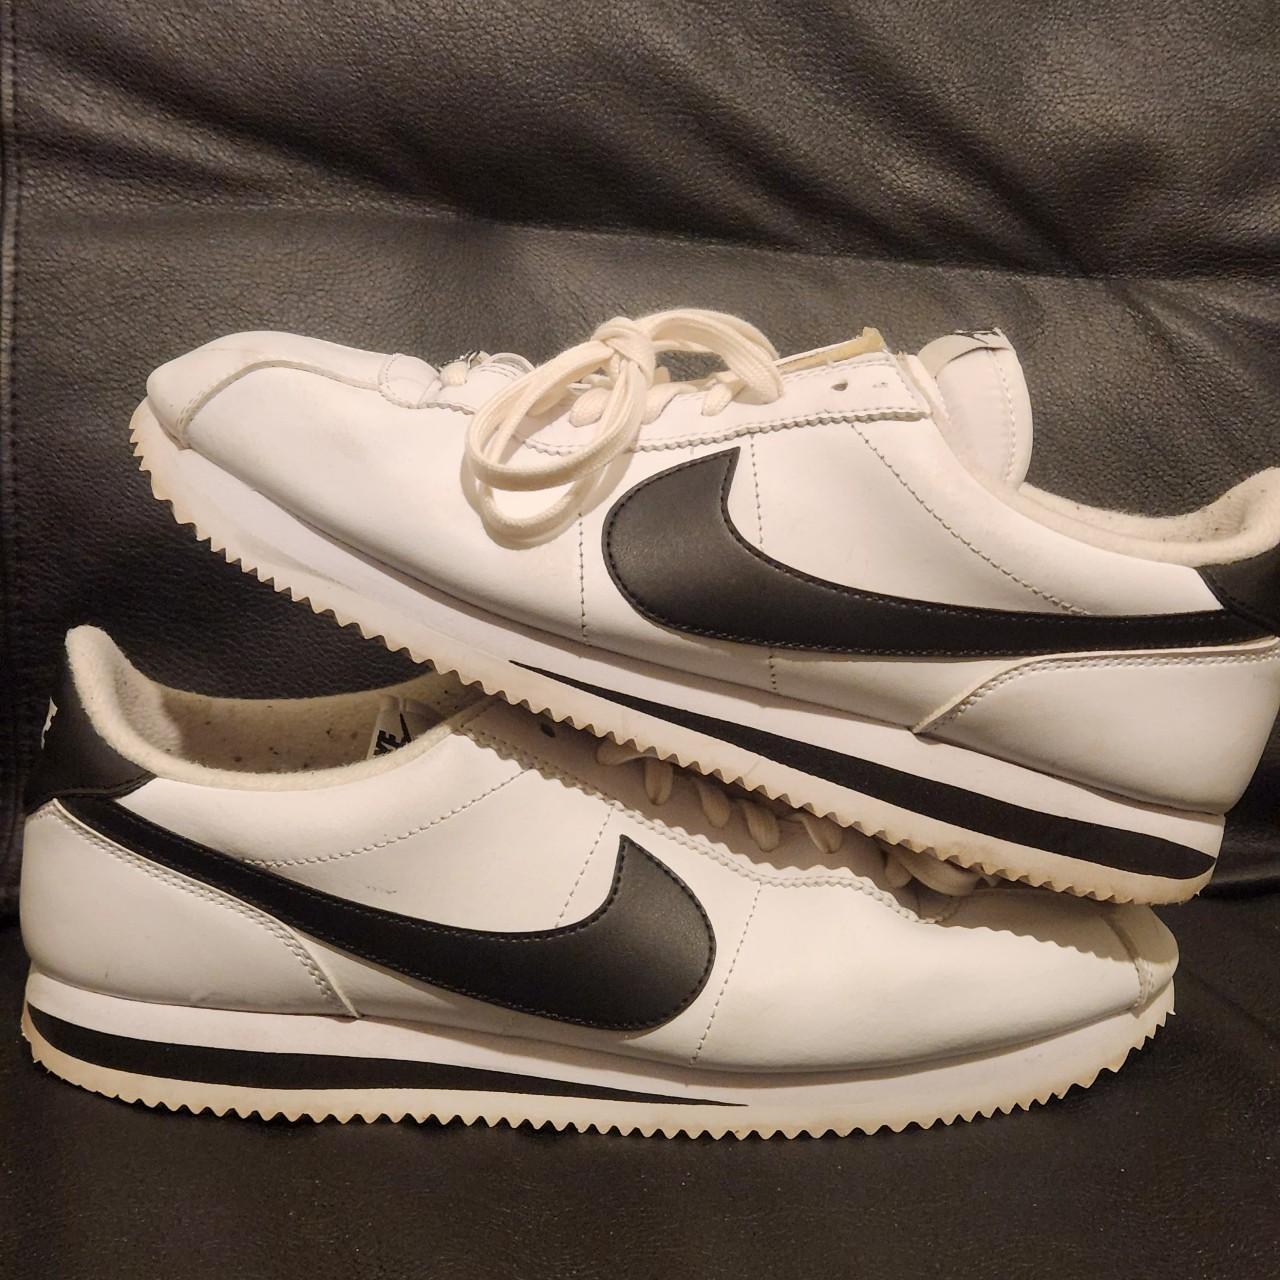 Nike Men's White and Black Trainers